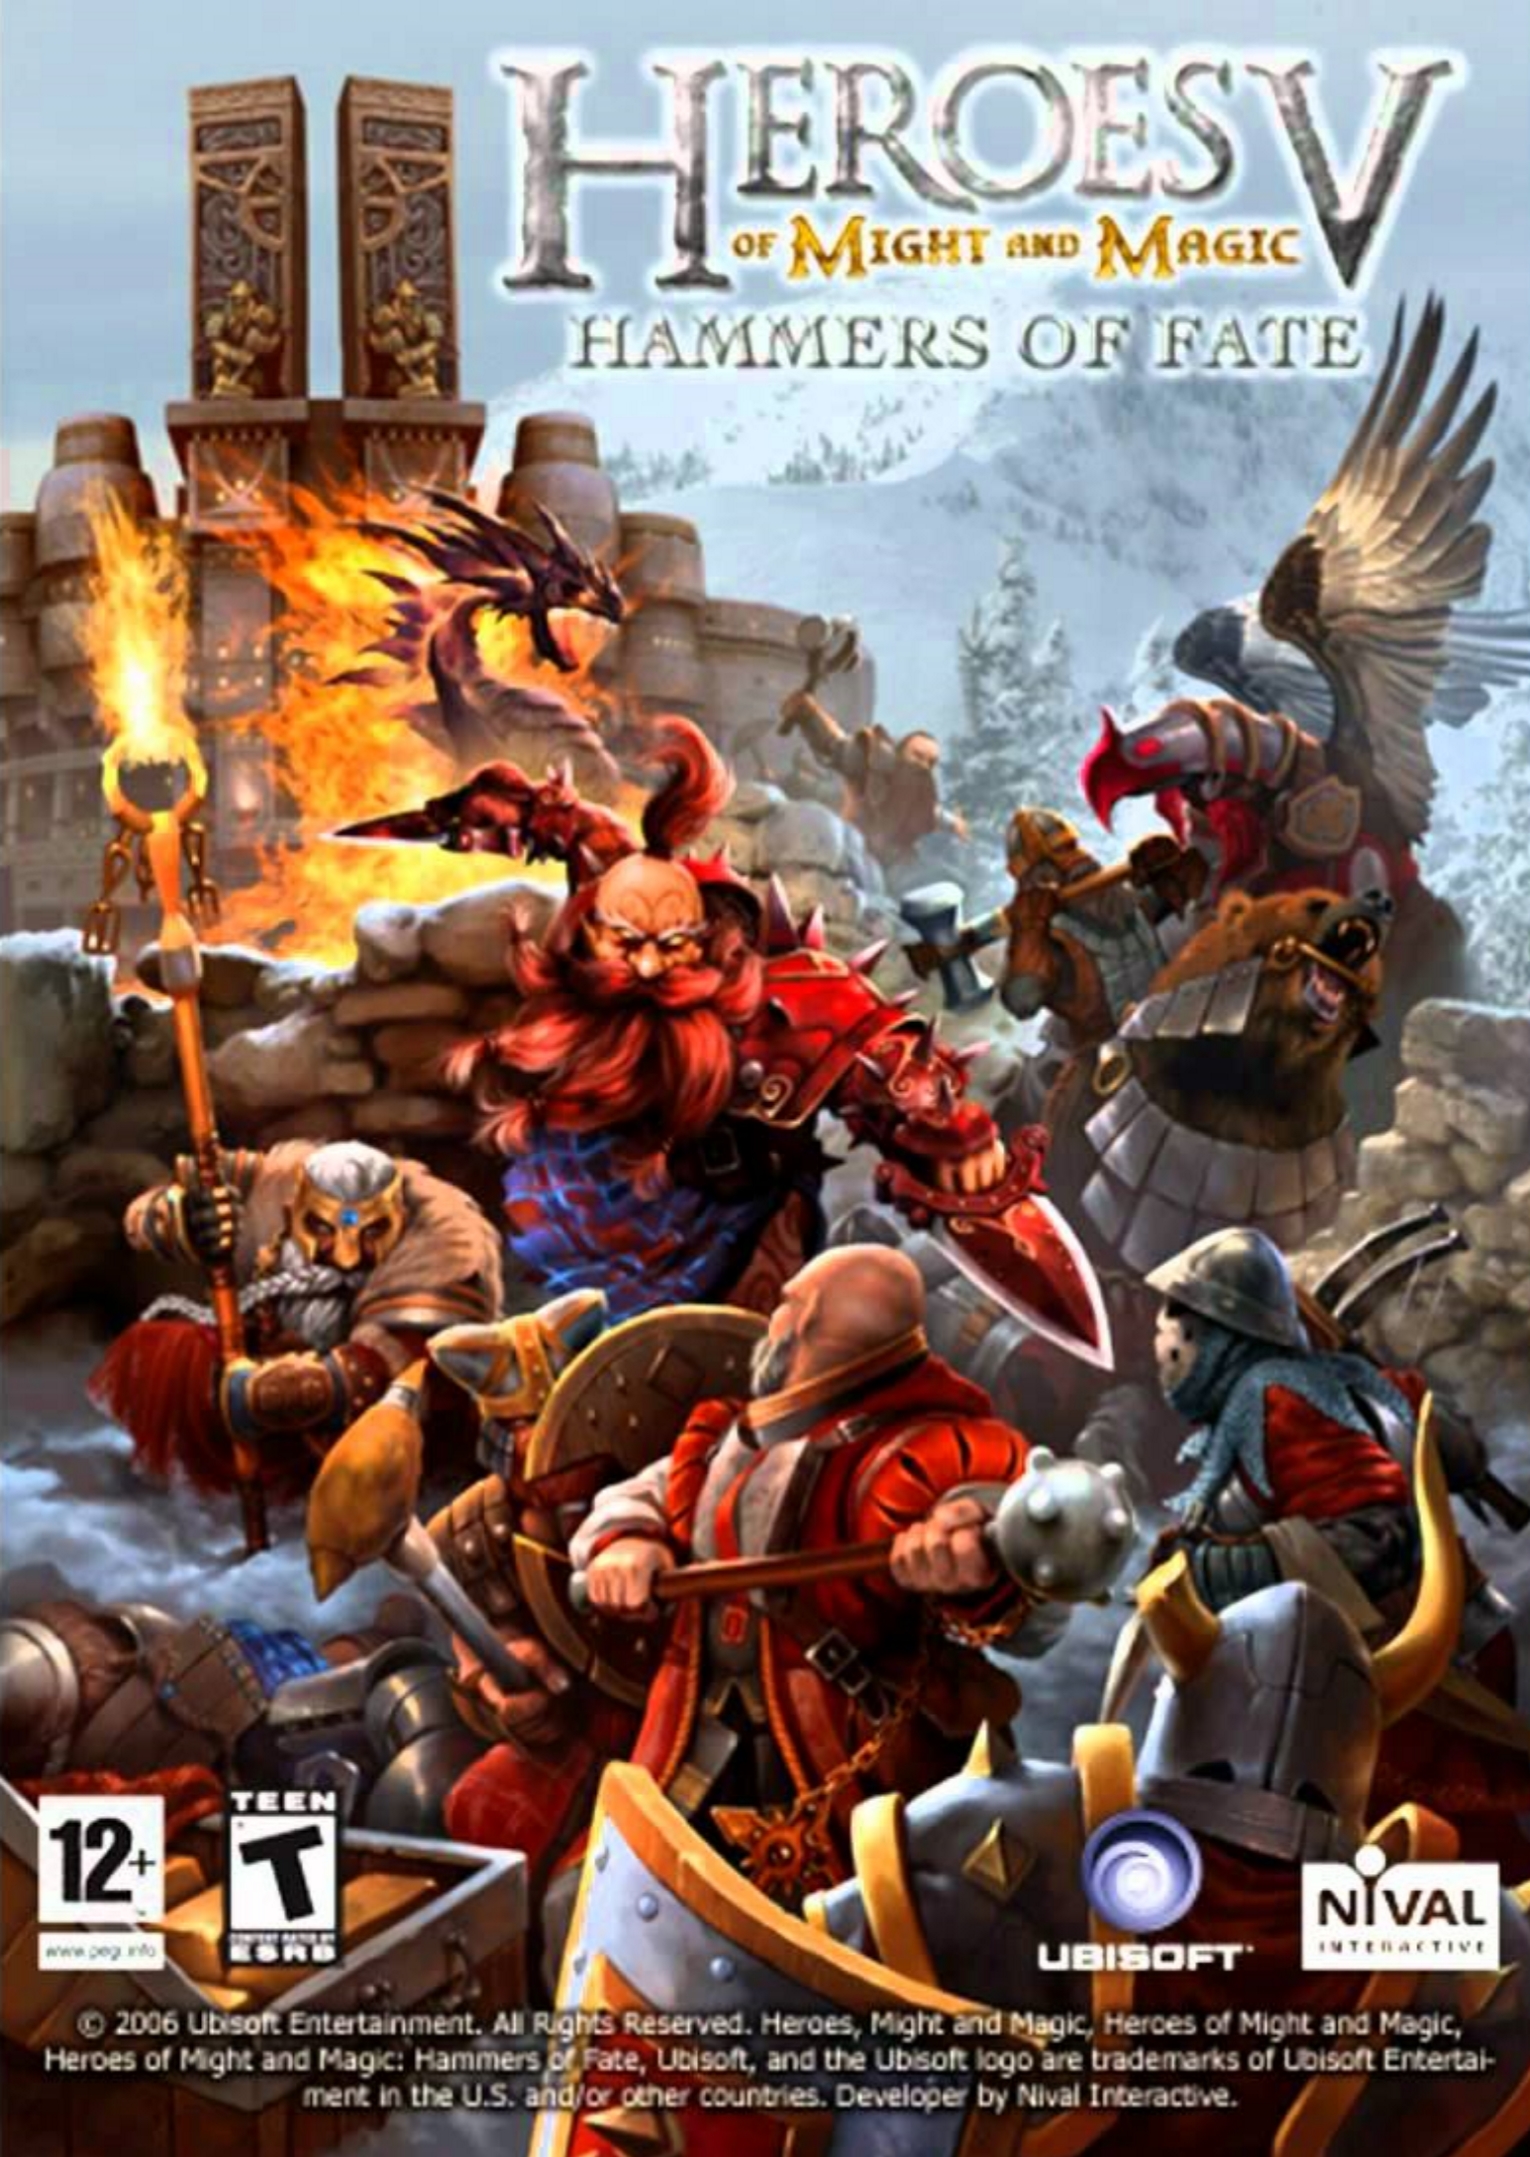 of Might and Magic V: Hammers Fate Images - LaunchBox Games Database